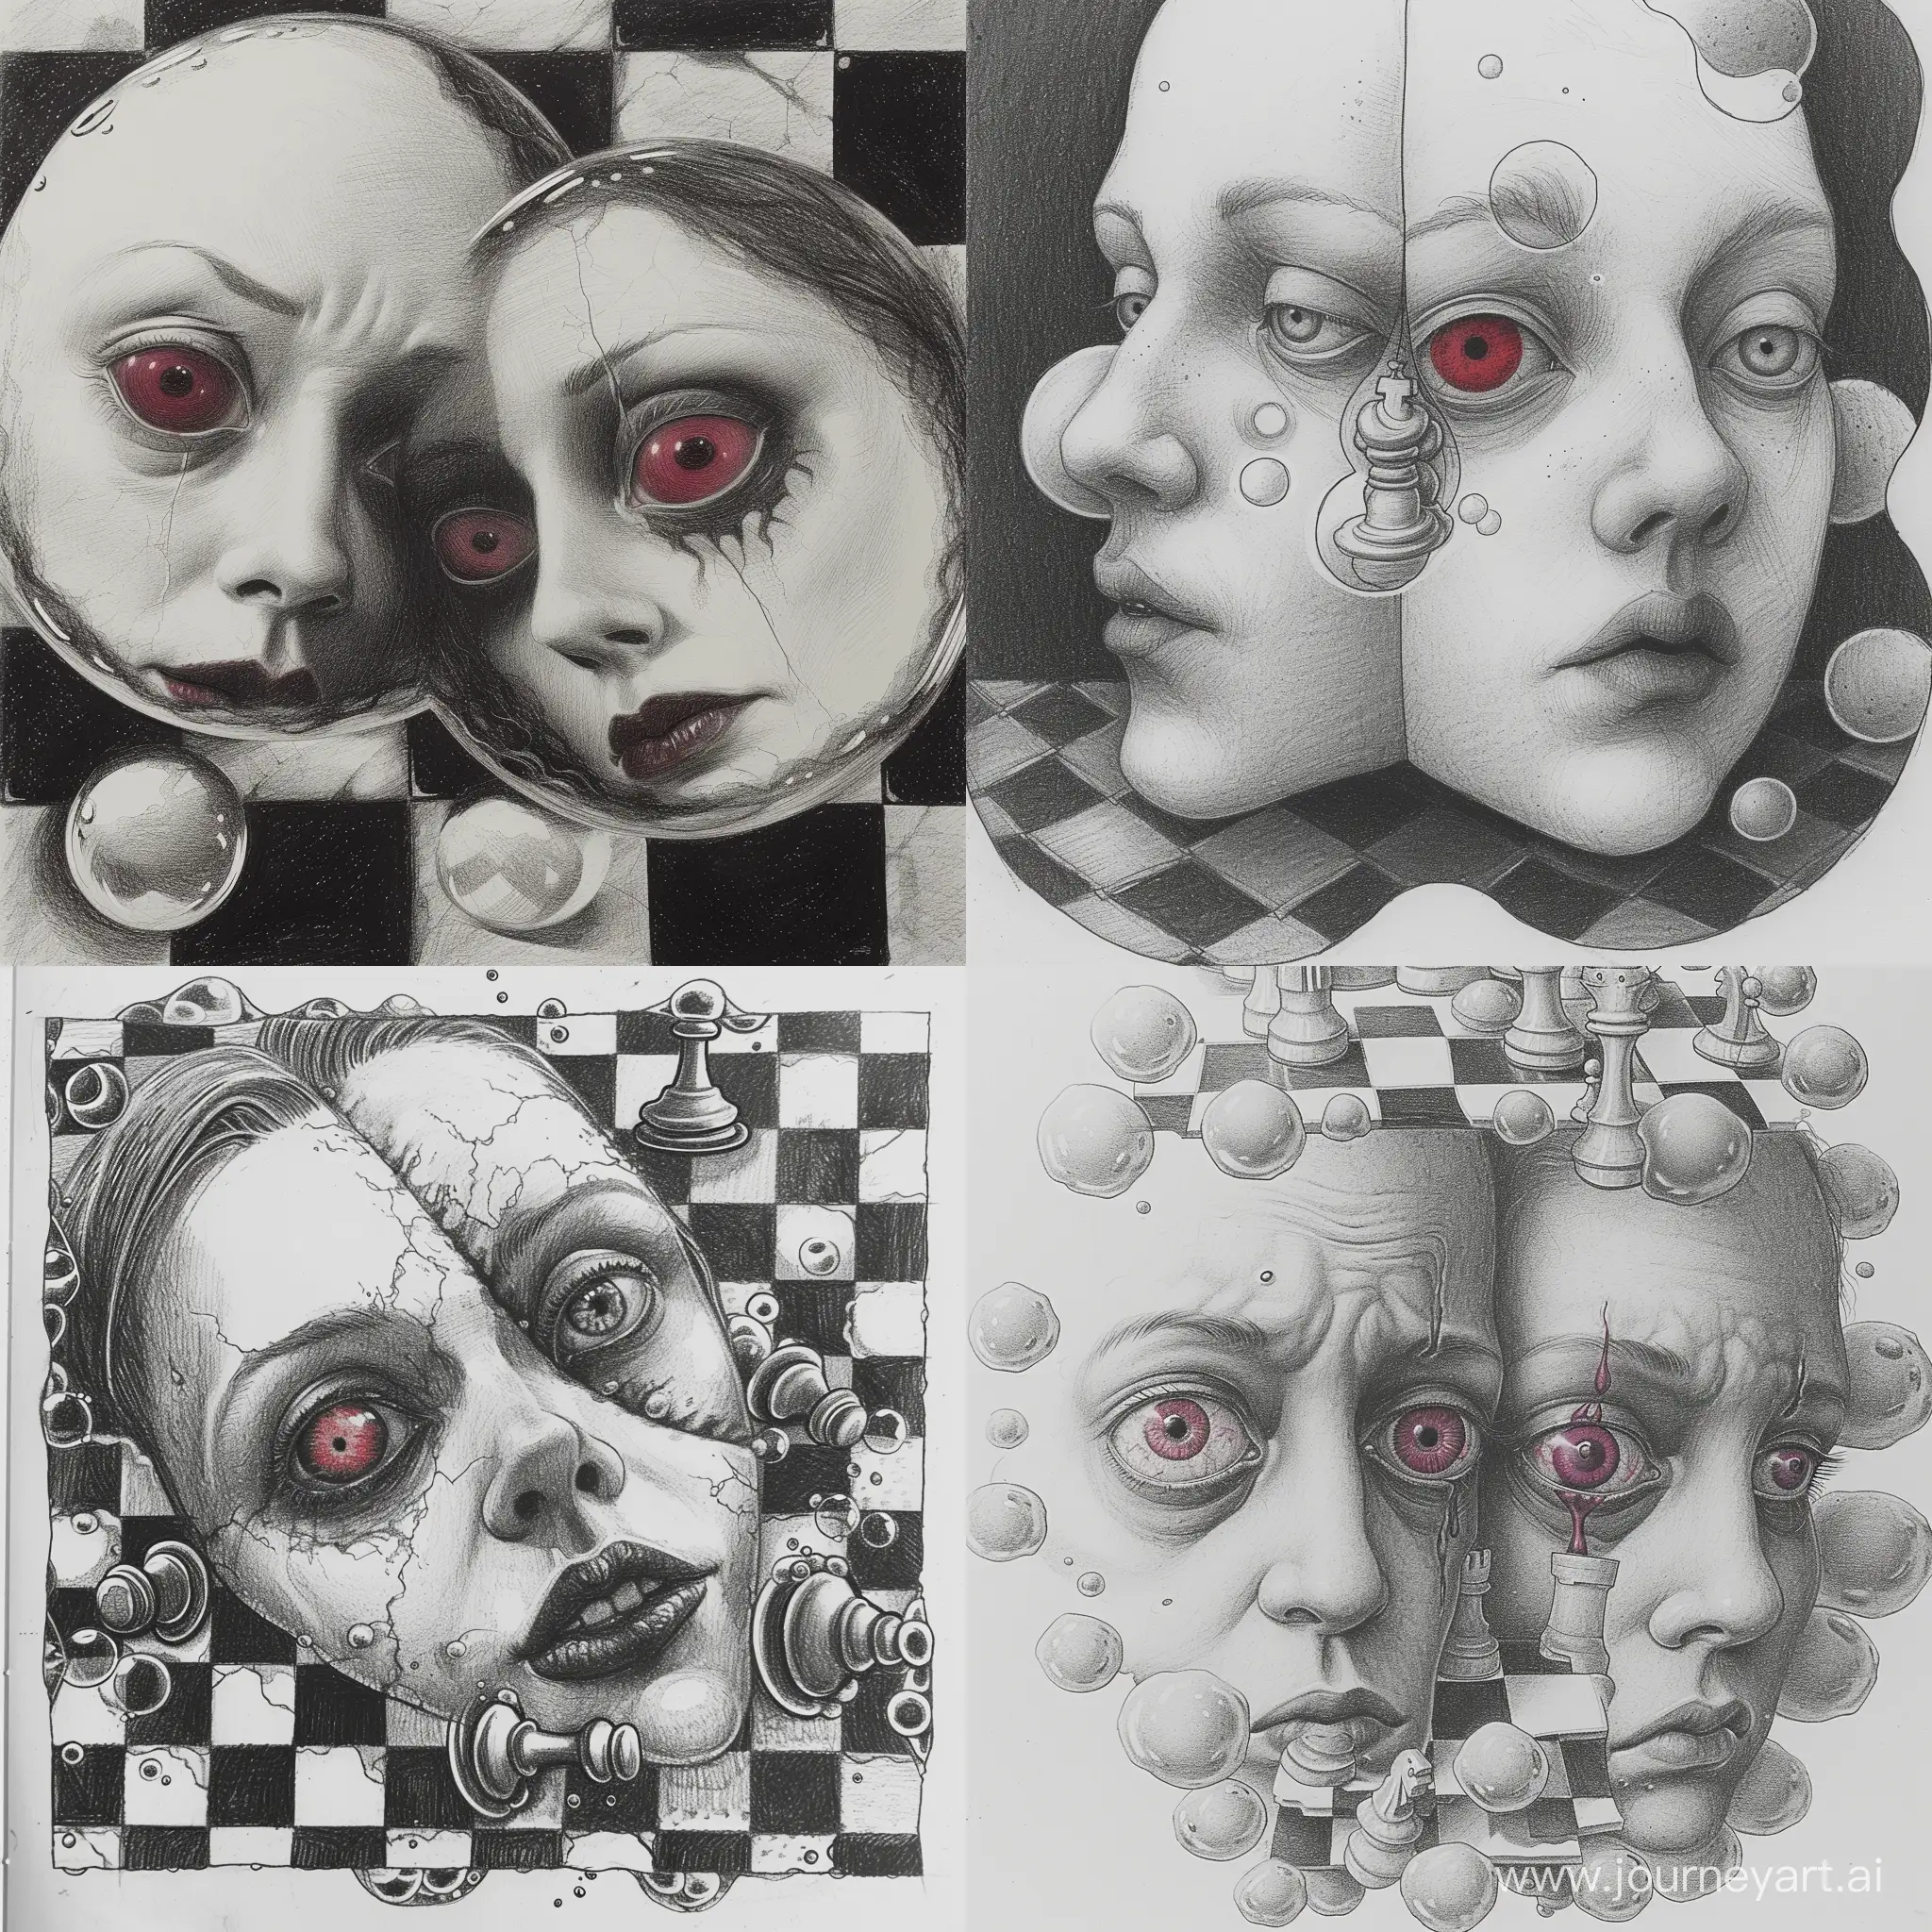 scarlet eyeball between the faces, White essence, Horror, Harlequin, pencil drawing, scarlet tears   A split personality lies in a chess bubble bath